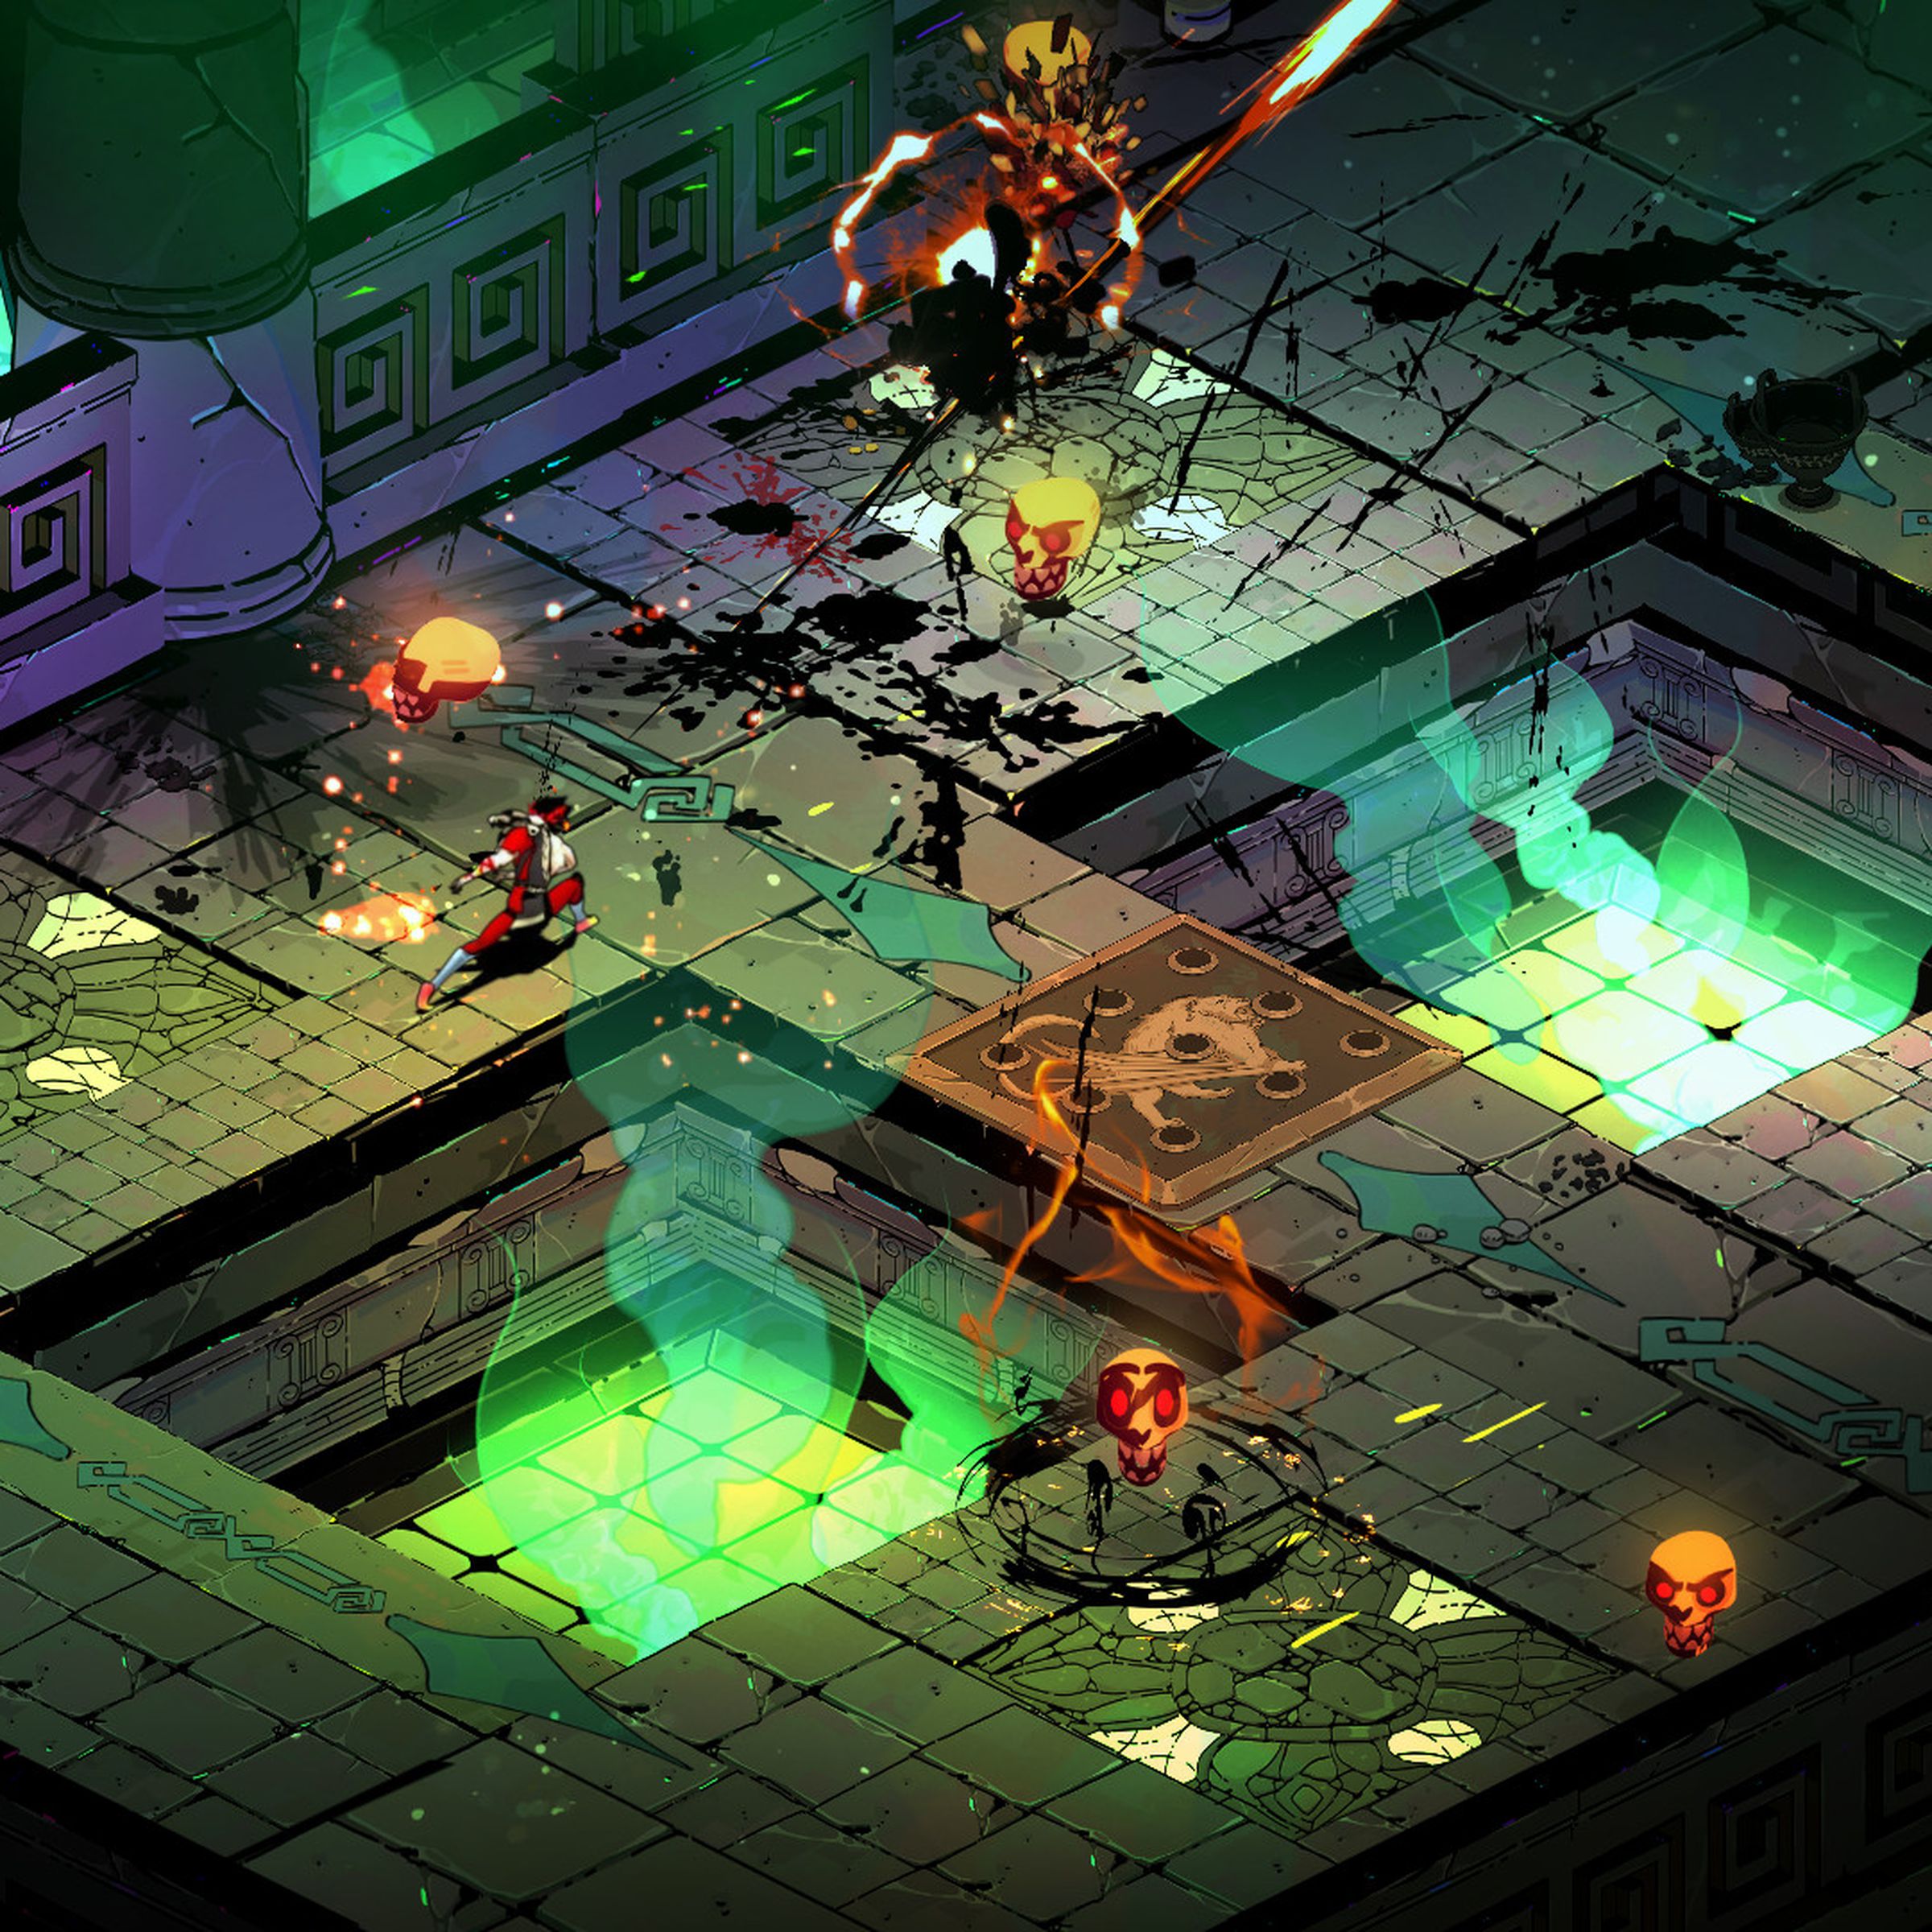 A screenshot from the video game Hades.